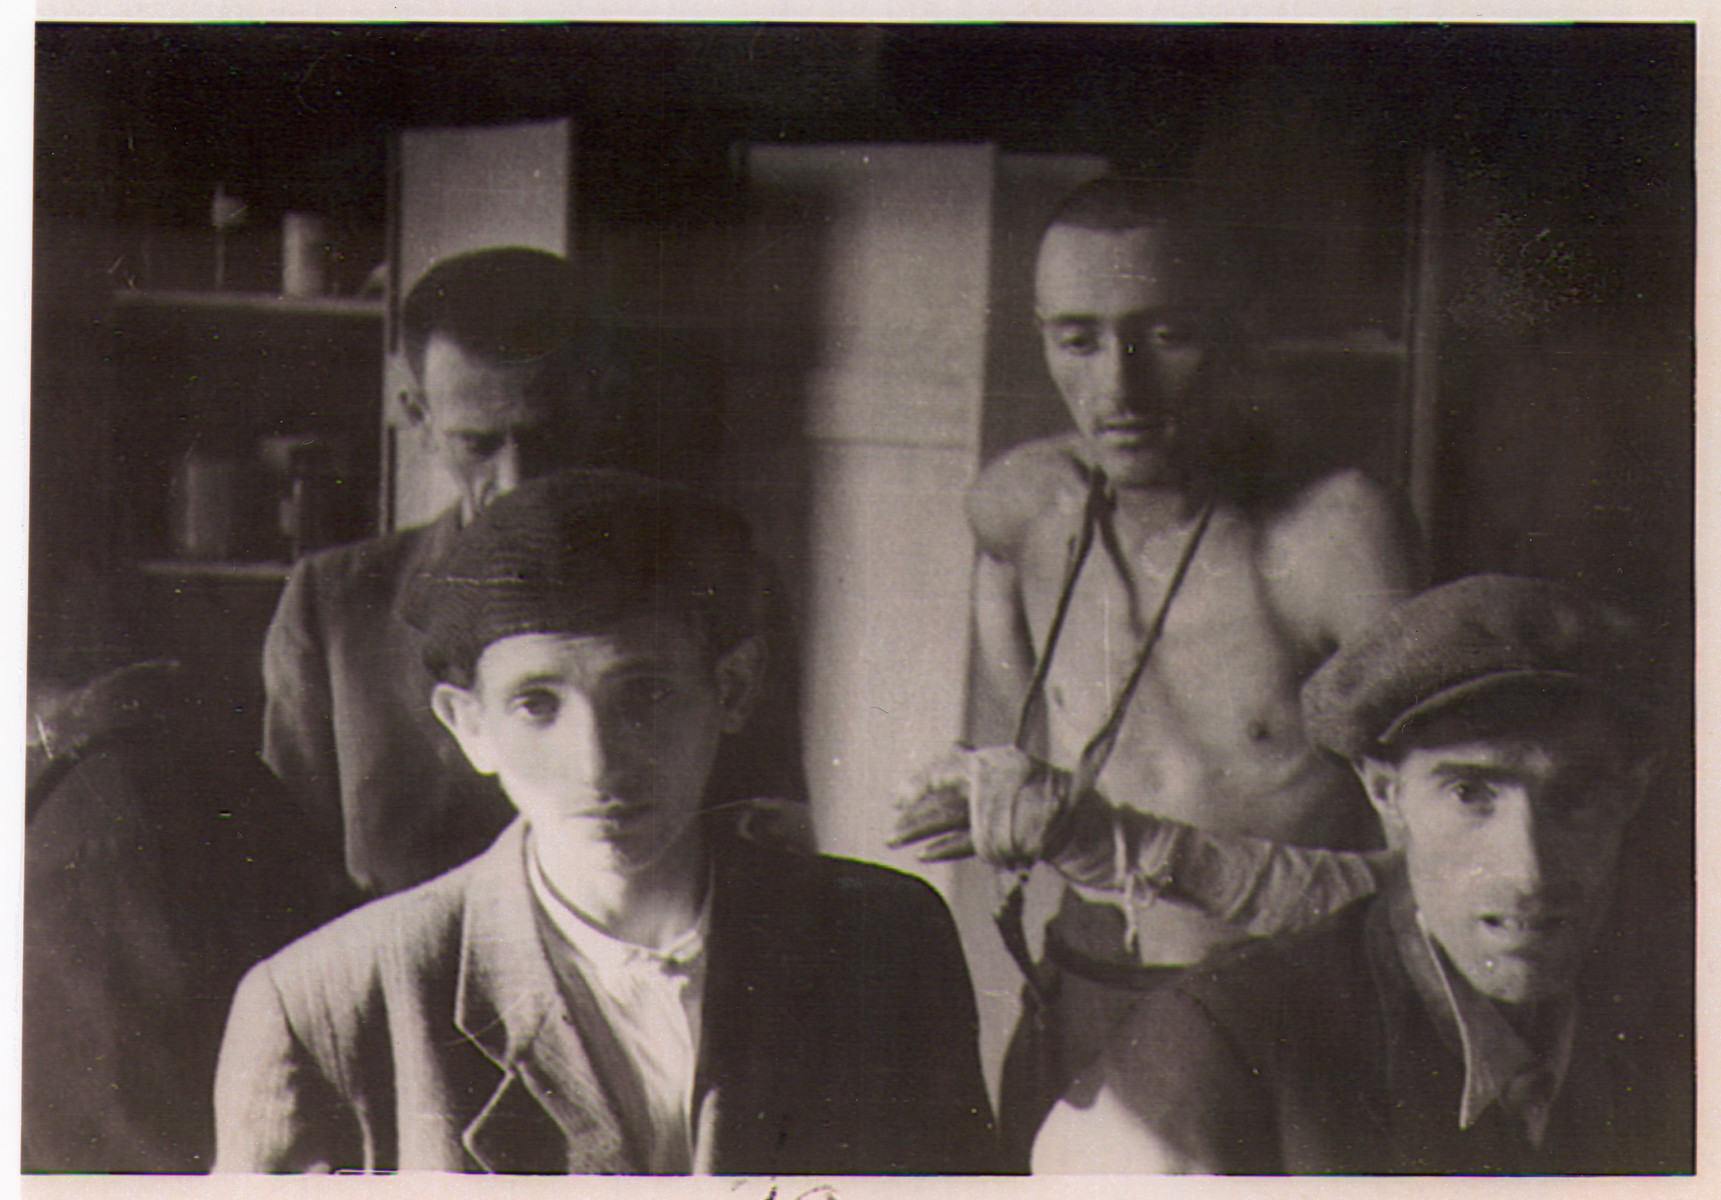 Four survivors of the Hanover-Ahlem concentration camp pose inside of a barrack.